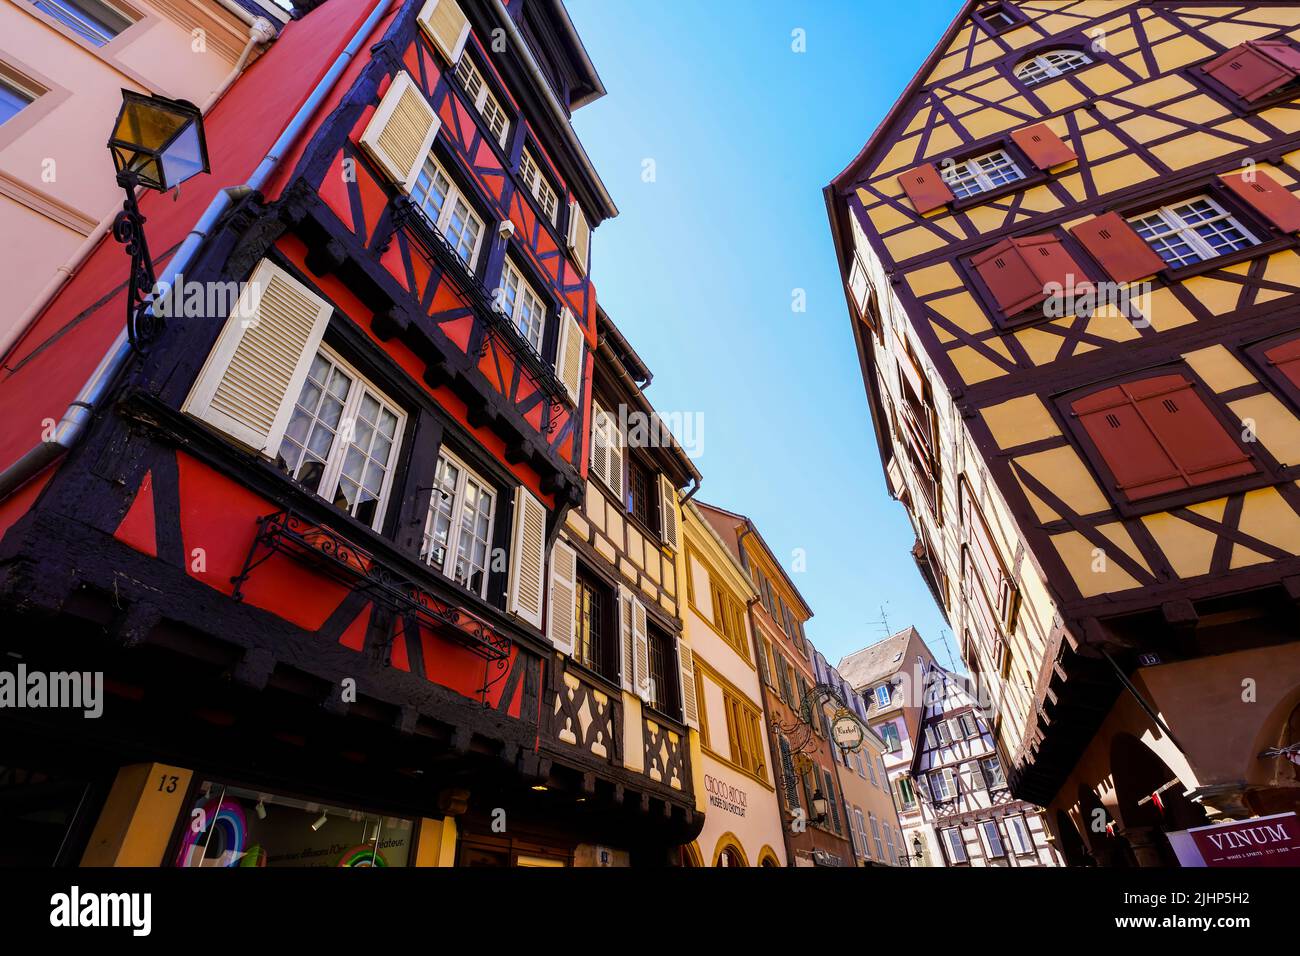 Colorful traditional Alsatian houses in the historic town of Colmar, Alsace, France. Stock Photo